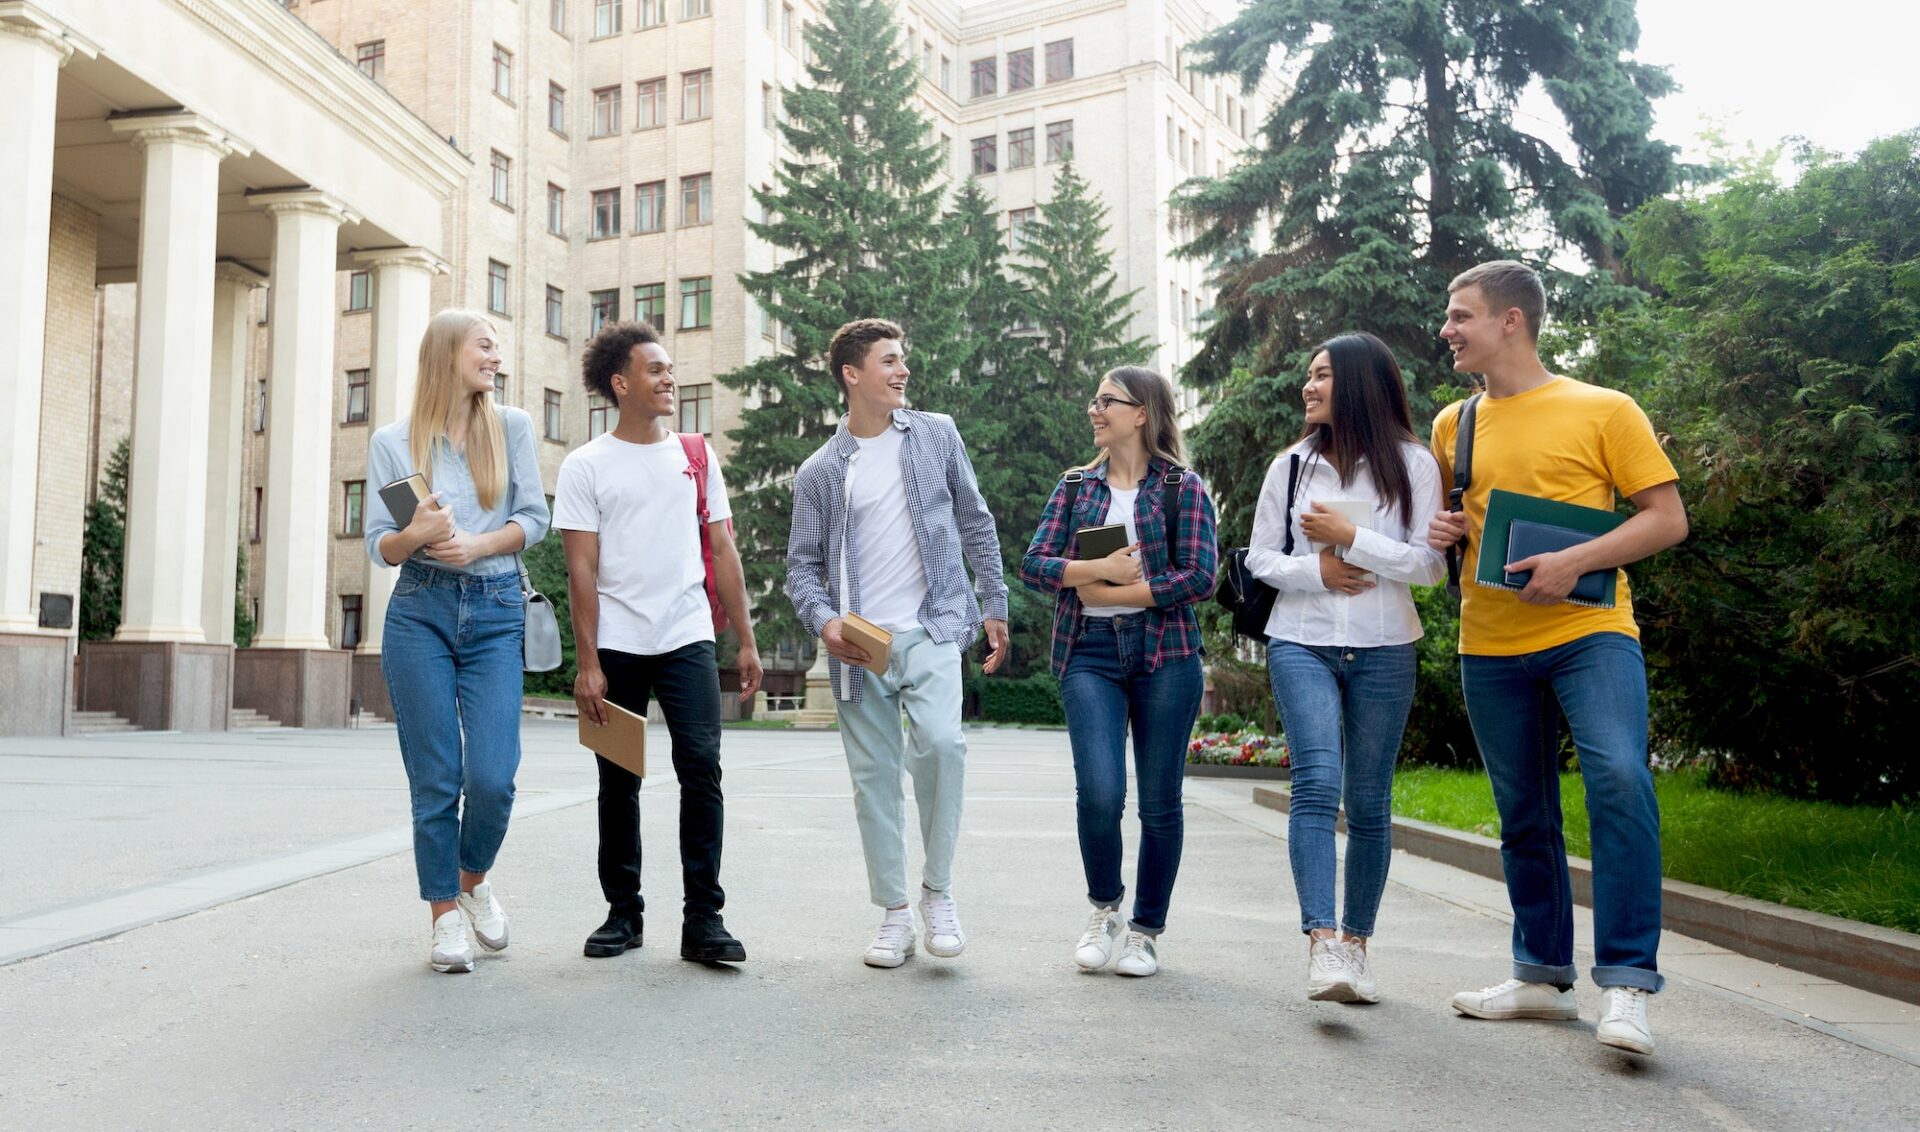 Happy students walking outside the university building